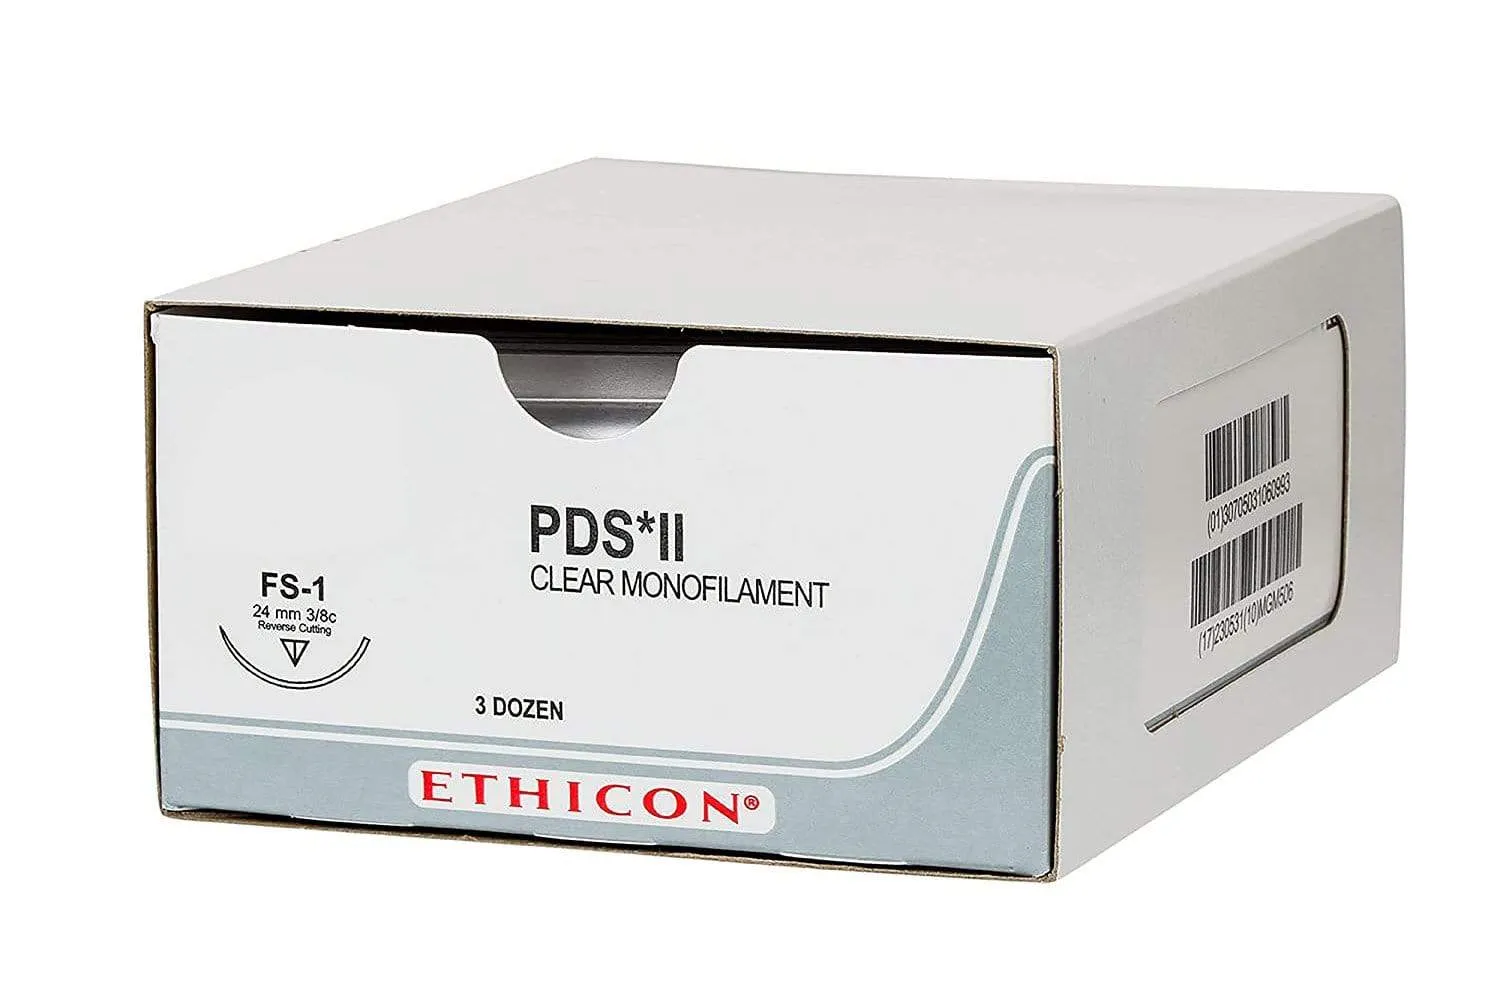 Ethicon PDS II Sutures USP 0, 1/2 Circle Taper Point CTX - Z1926G -12 Foils